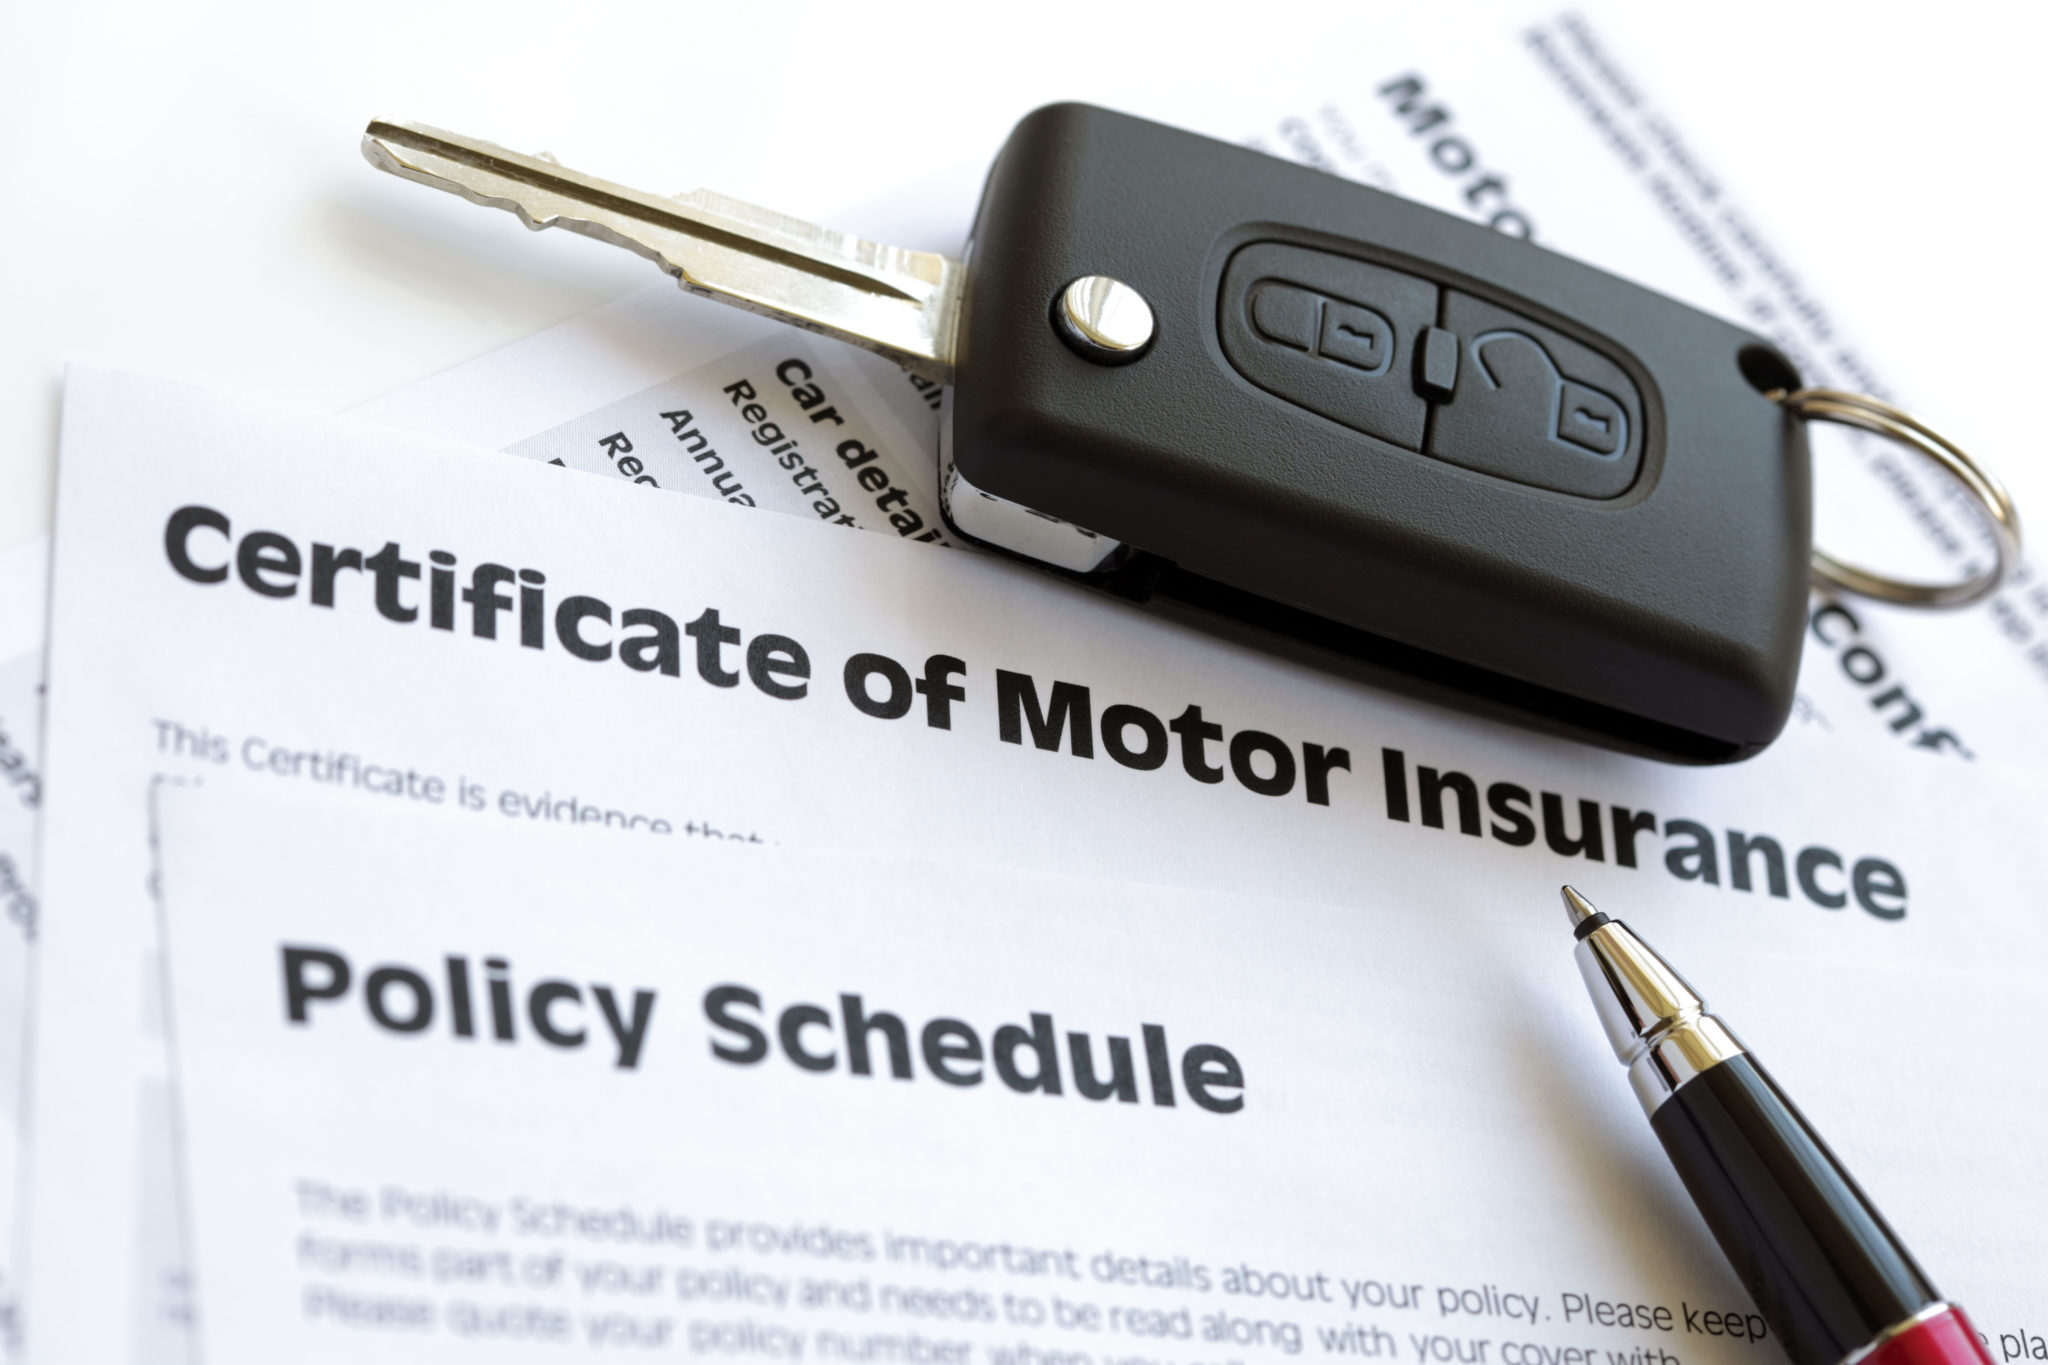 A motor insurance certificate with a car key in August 2011.